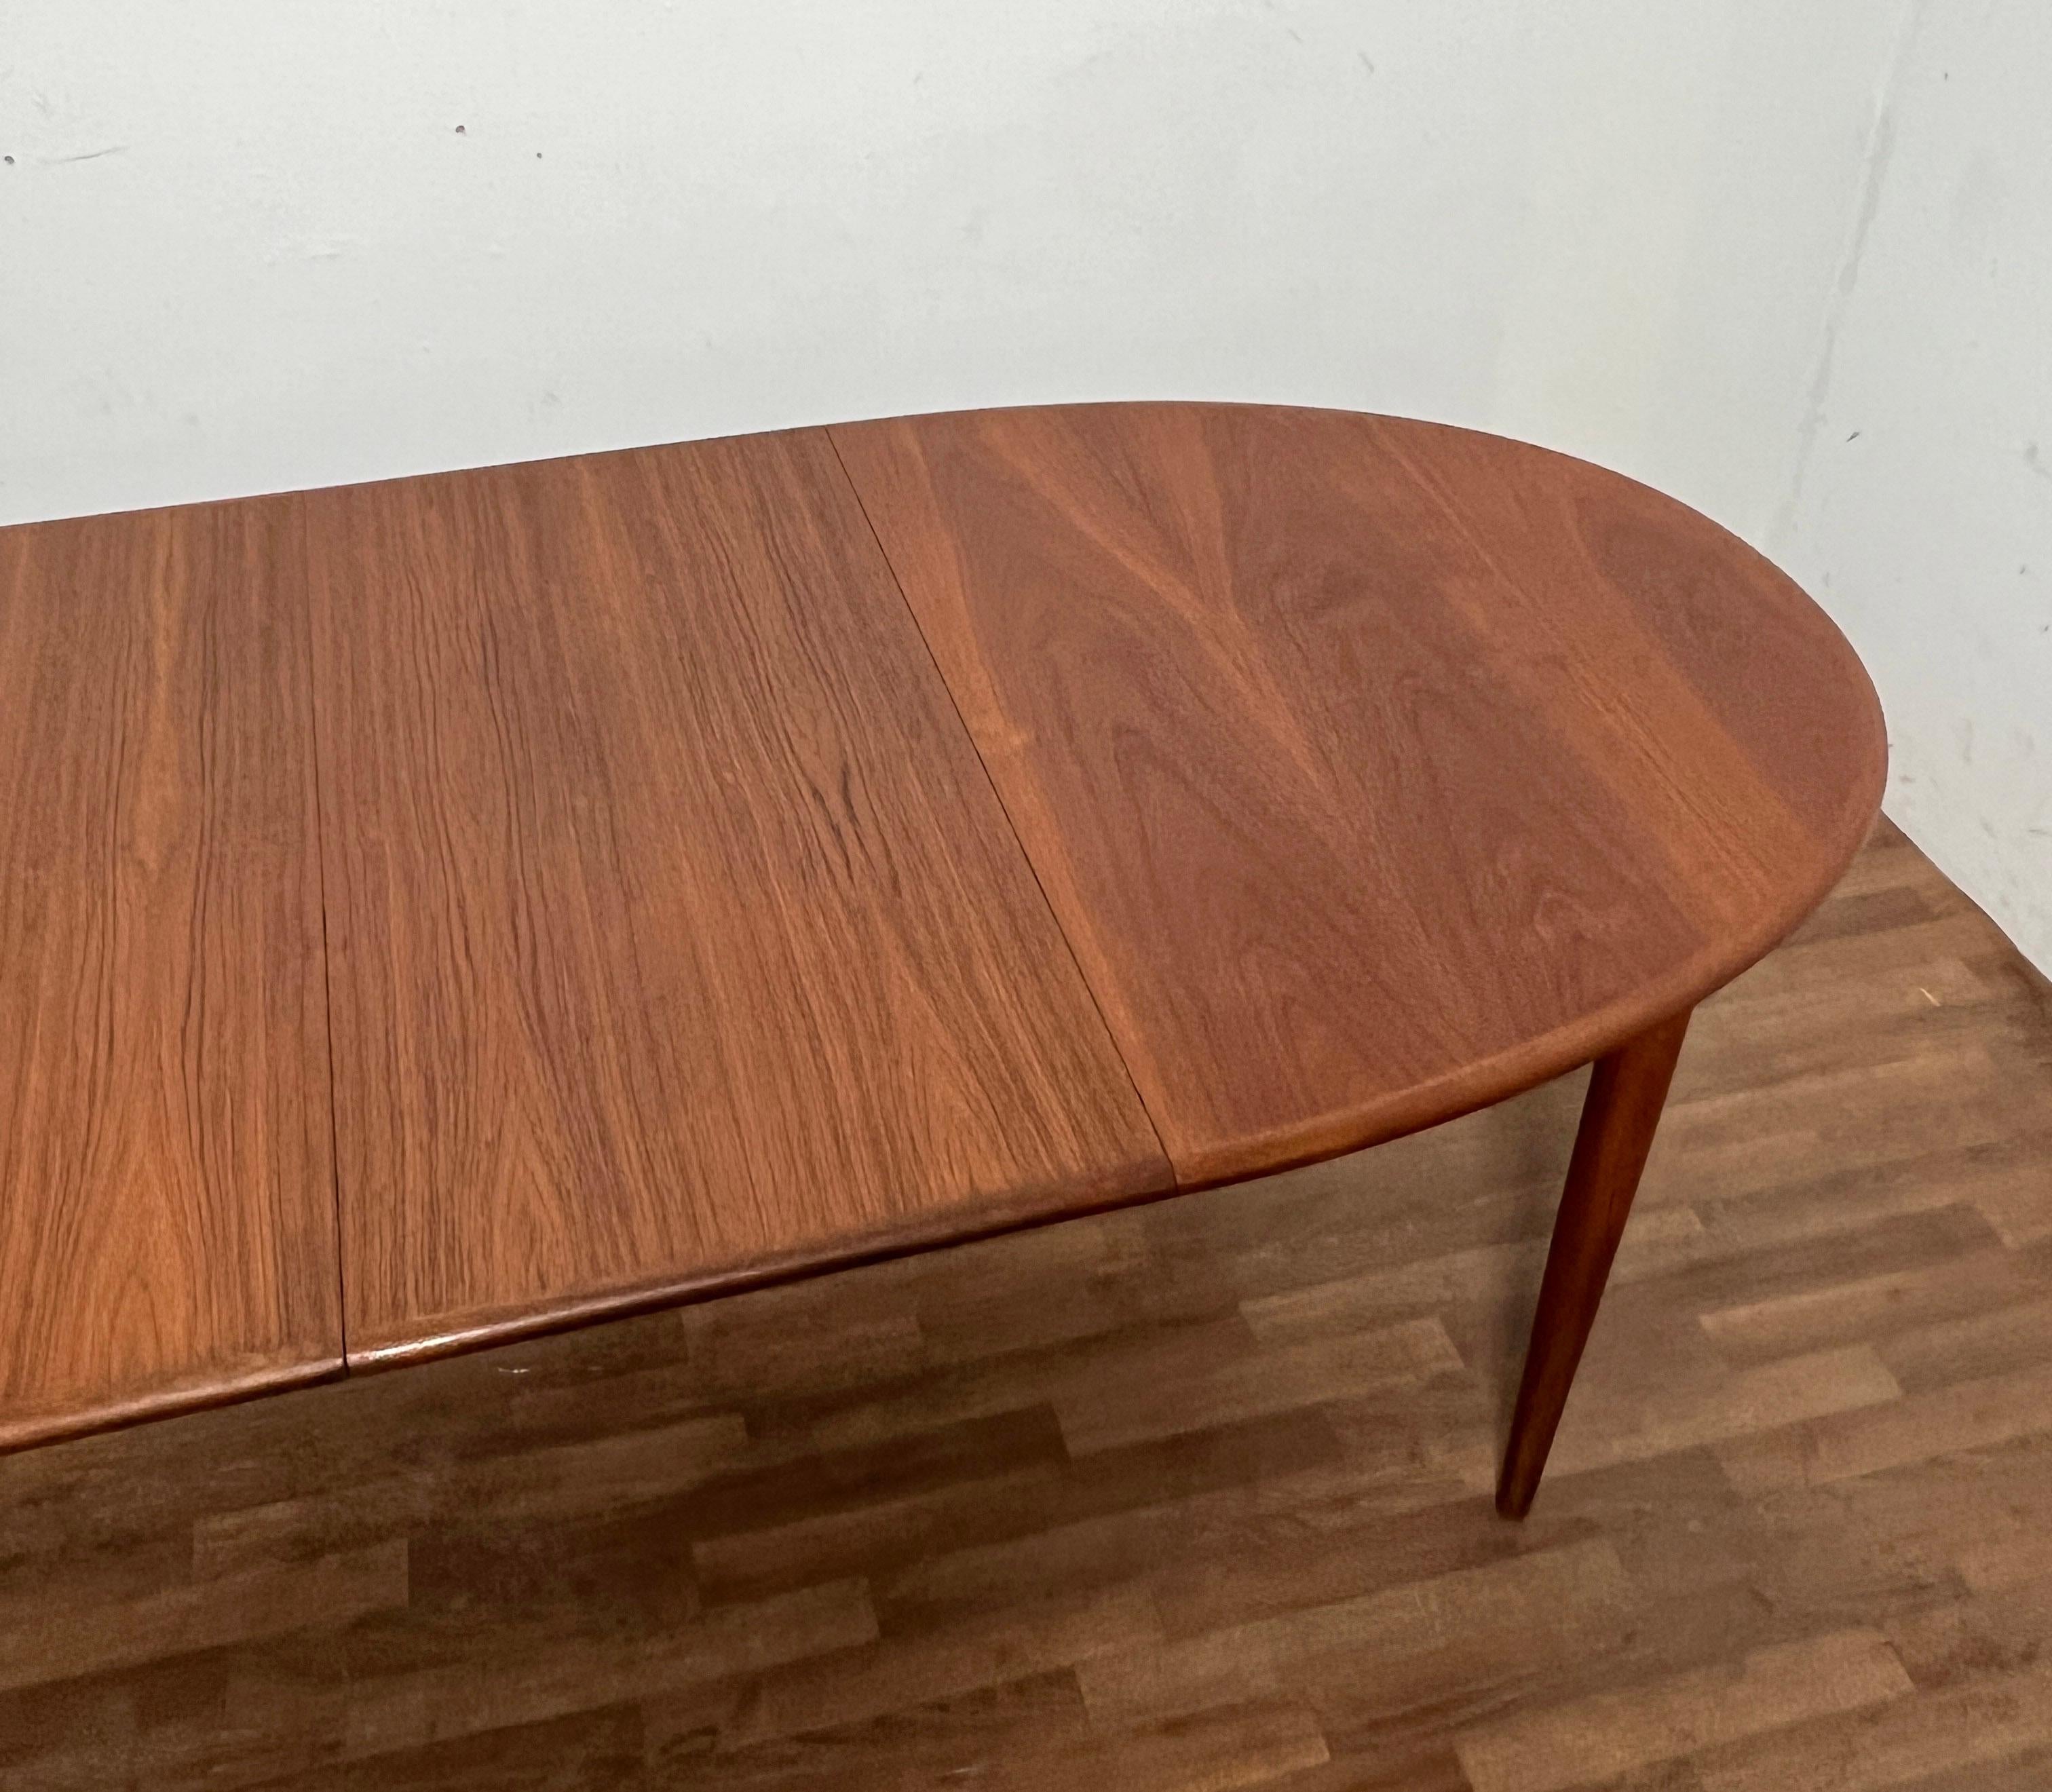 Danish Teak Oval Dining Table With Two Leaves by Gudme, Circa 1960s For Sale 1